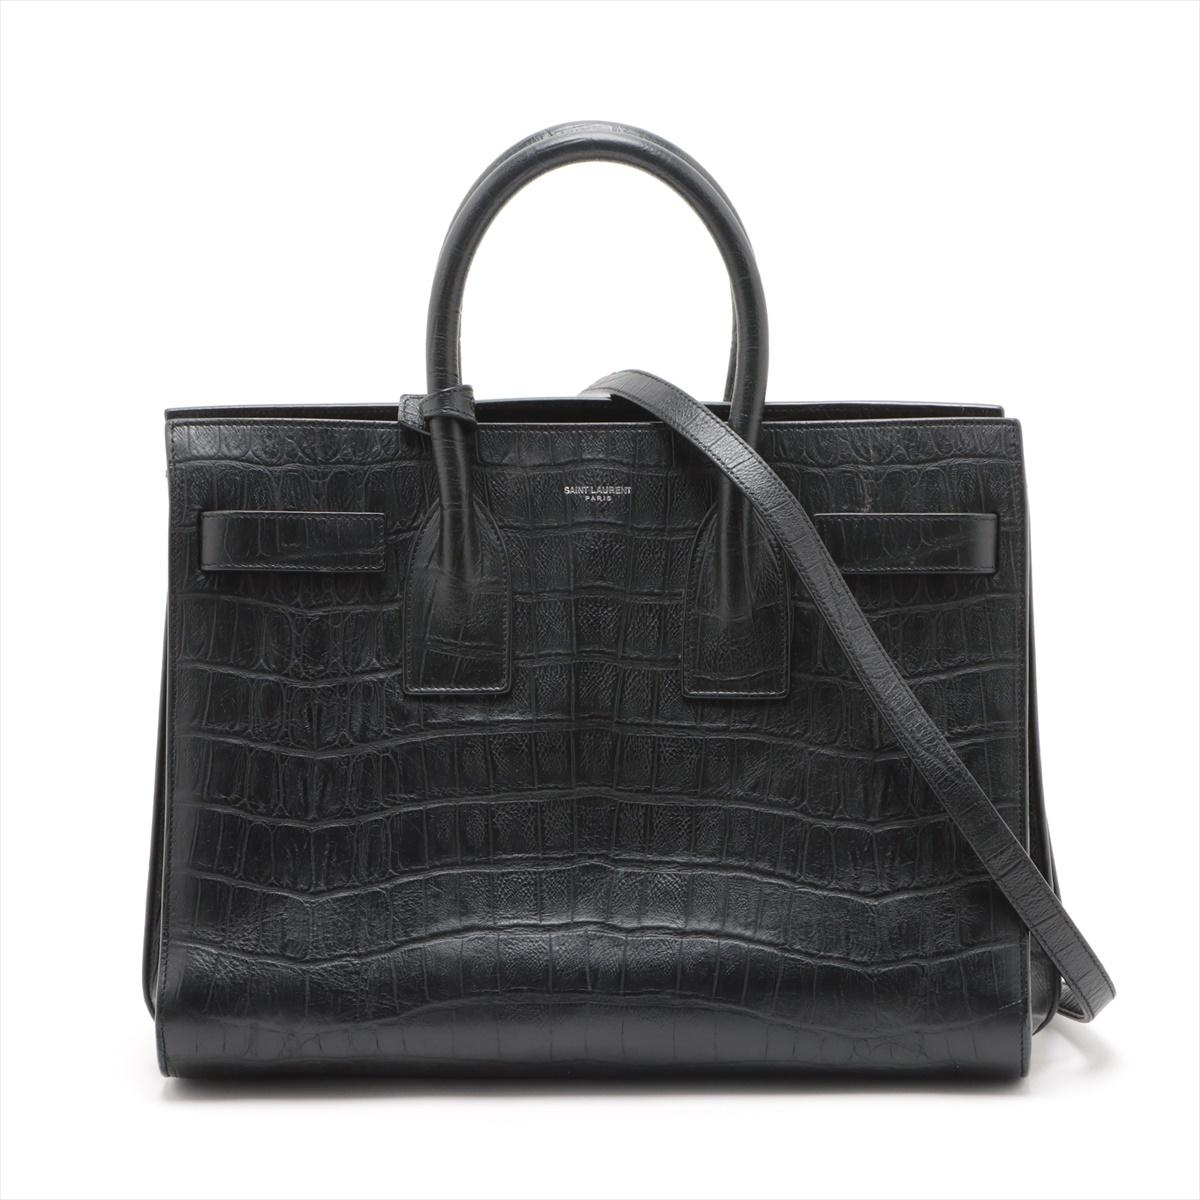 The Saint Laurent Paris Sac de Jour Croc Two-Way Handbag in Black is a luxurious and versatile accessory that exudes timeless sophistication. Crafted from exquisite croc-embossed leather, the handbag boasts a structured silhouette with clean lines